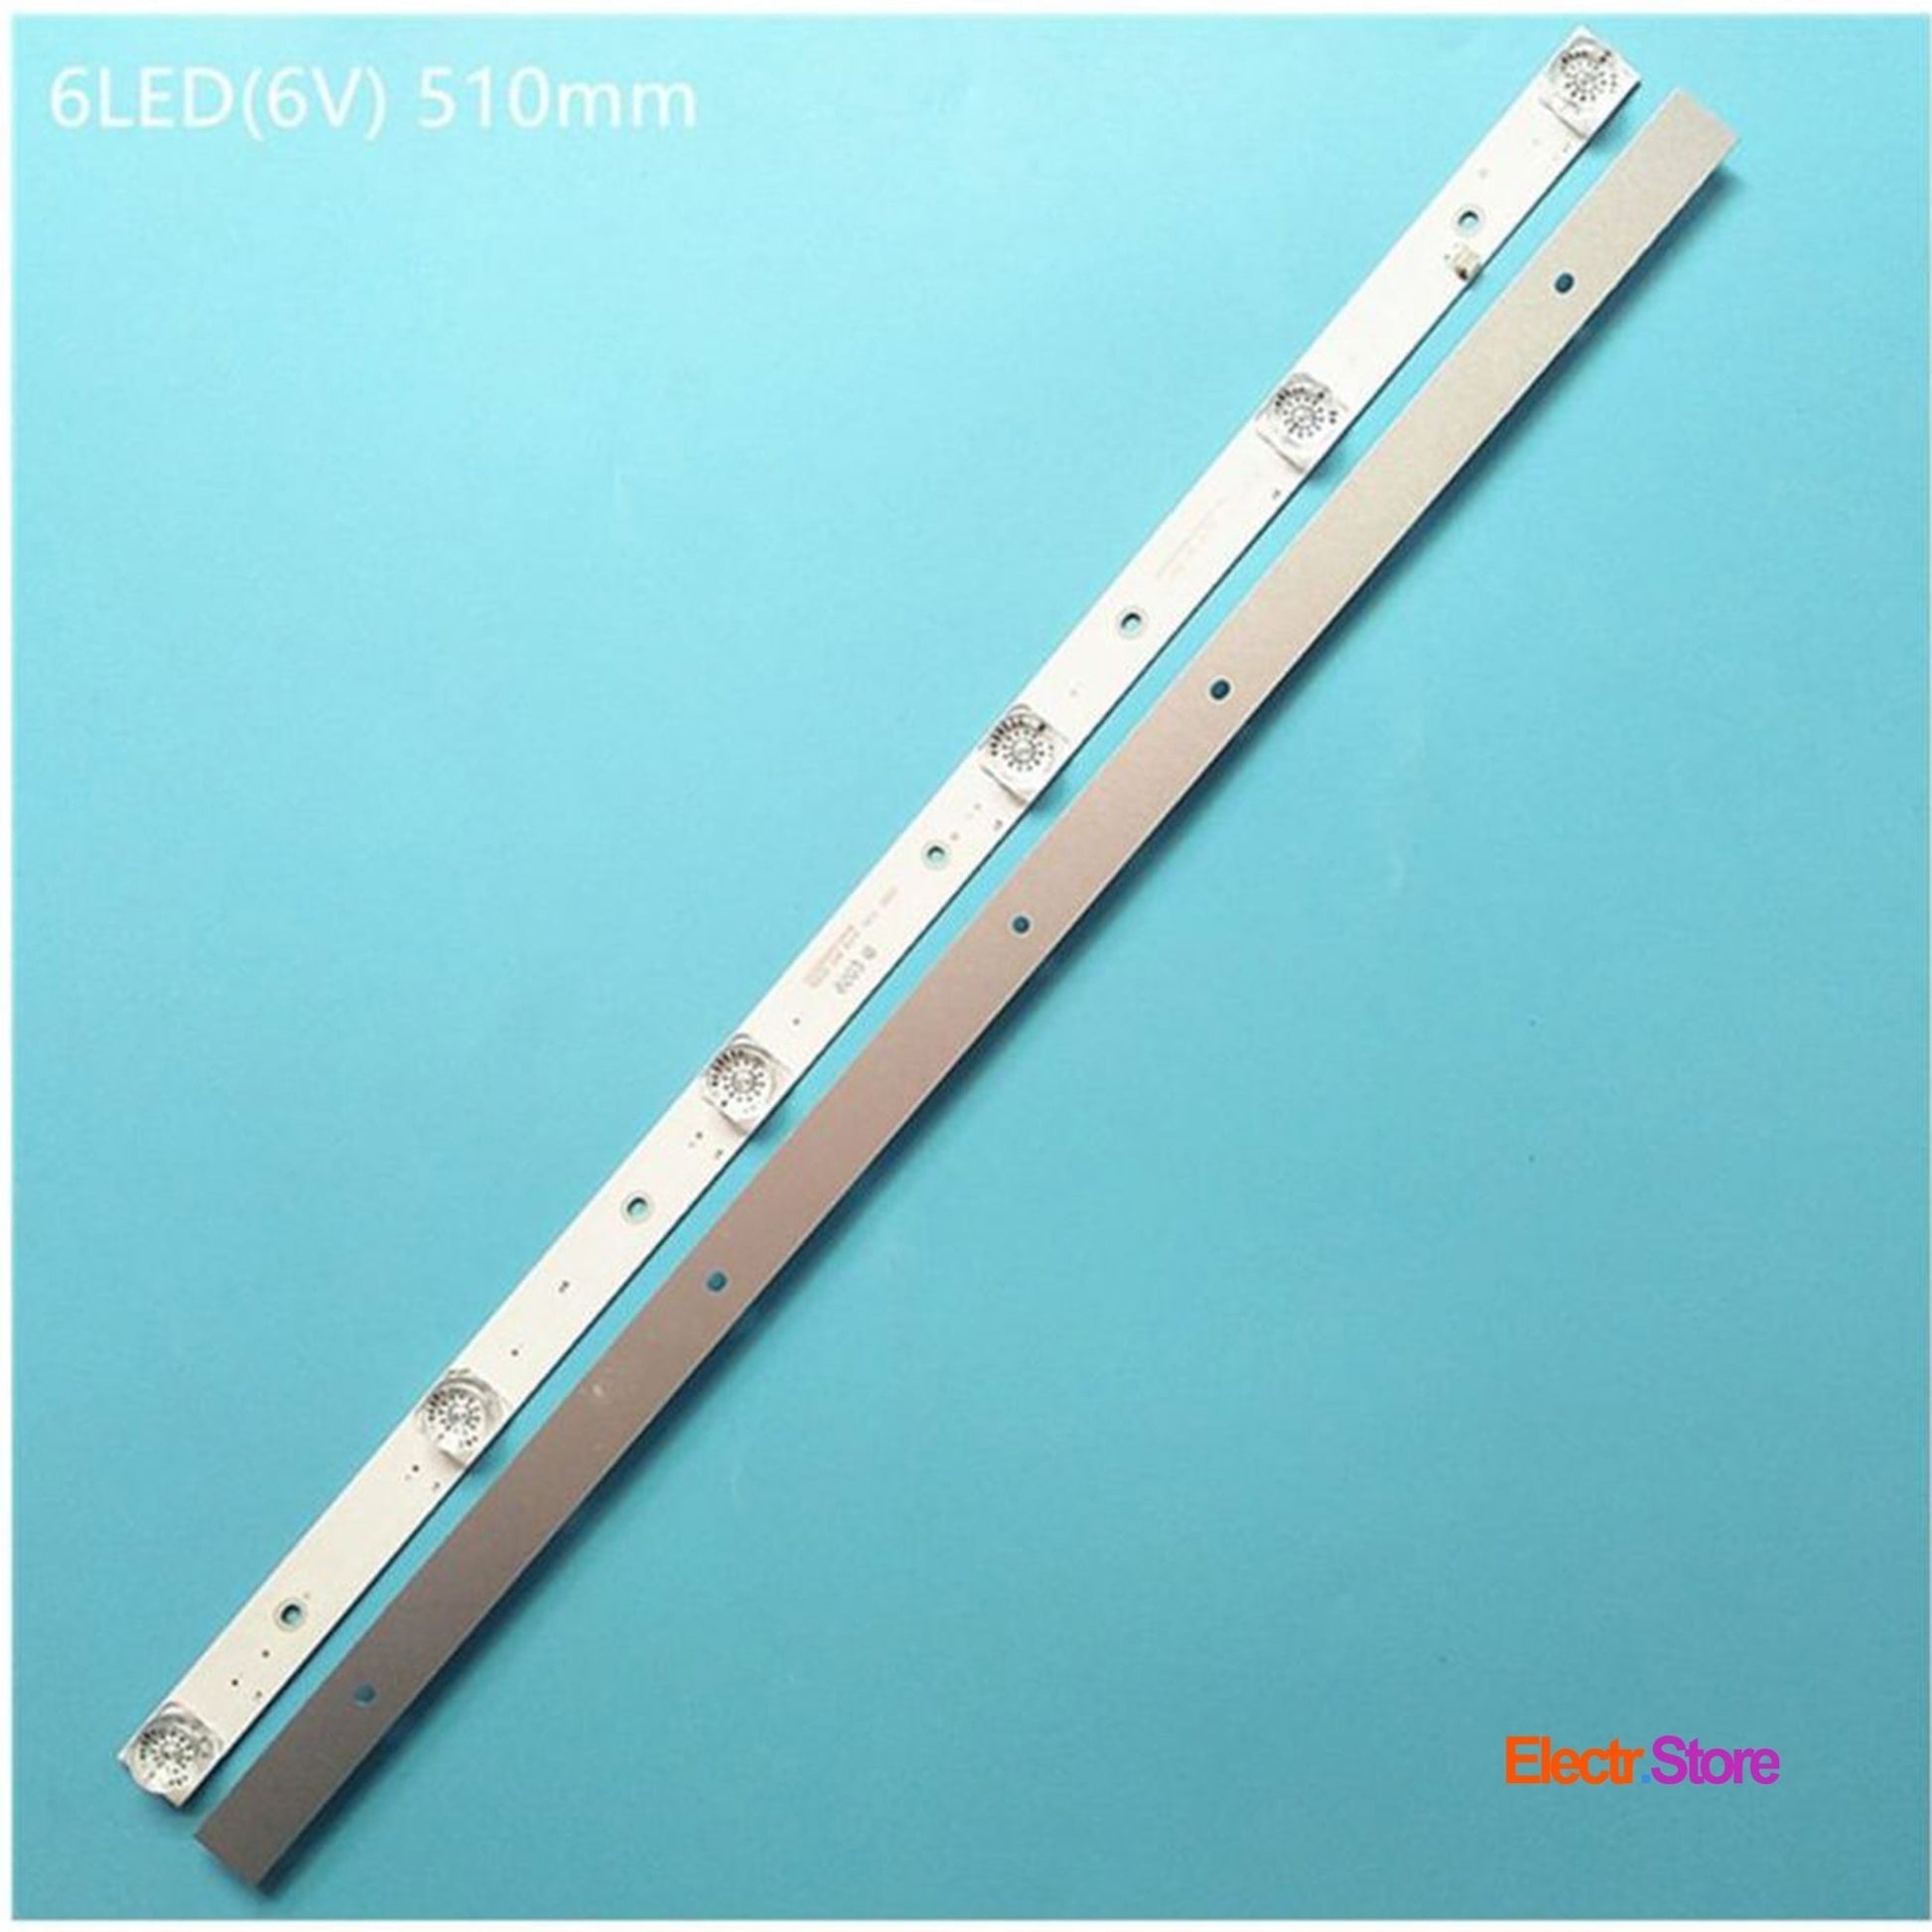 LED Backlight Strip Kits, CC02320D510V06 32E20 2x6 6S1P 1910 0D20, CC02320D510V09 32E20 2x6 6S1P 1410 0D20, MS-L2027 (2 pcs/kit), for TV 32" LEVEL: HD8332 32" CC02320D510V06 32e20 2x6 6s1p 1910 0d20 Dexp LED Backlights LEVEL Matrix Panda UNITED Electr.Store